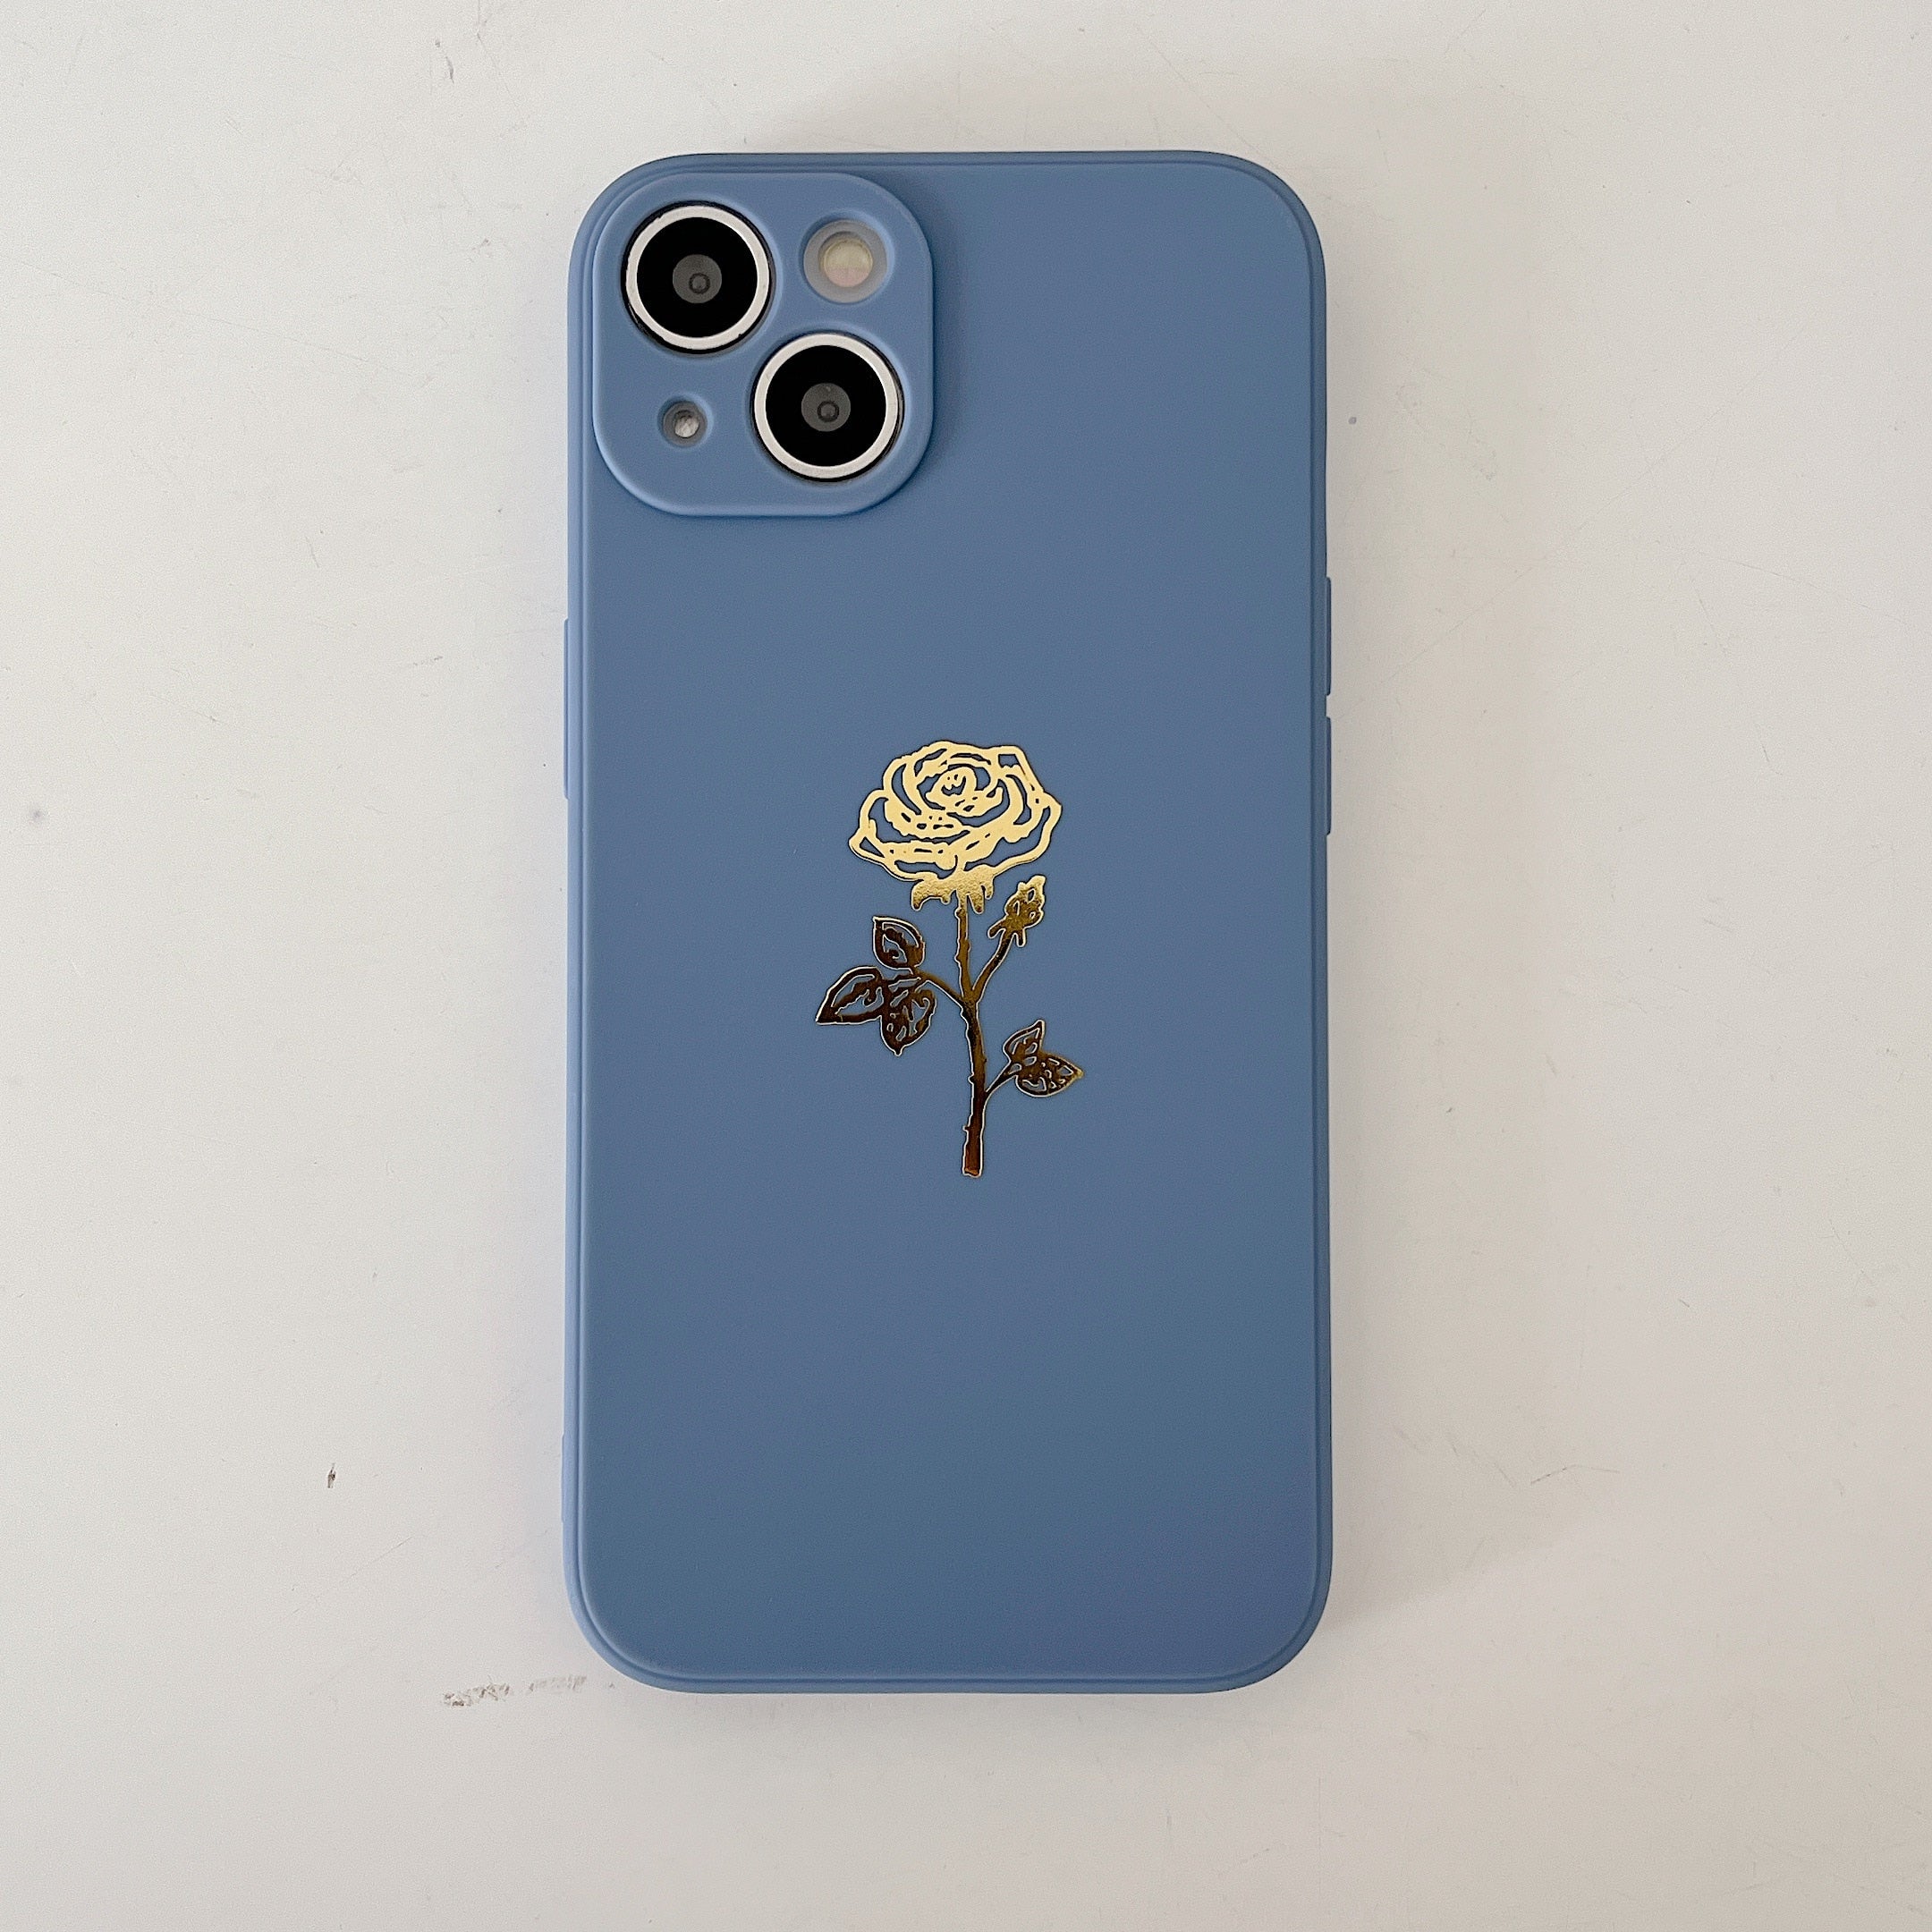 Silicone iPhone Case with Plated Rose Flower-Fonally-For iPhone 7 or 8-Blue Gray-